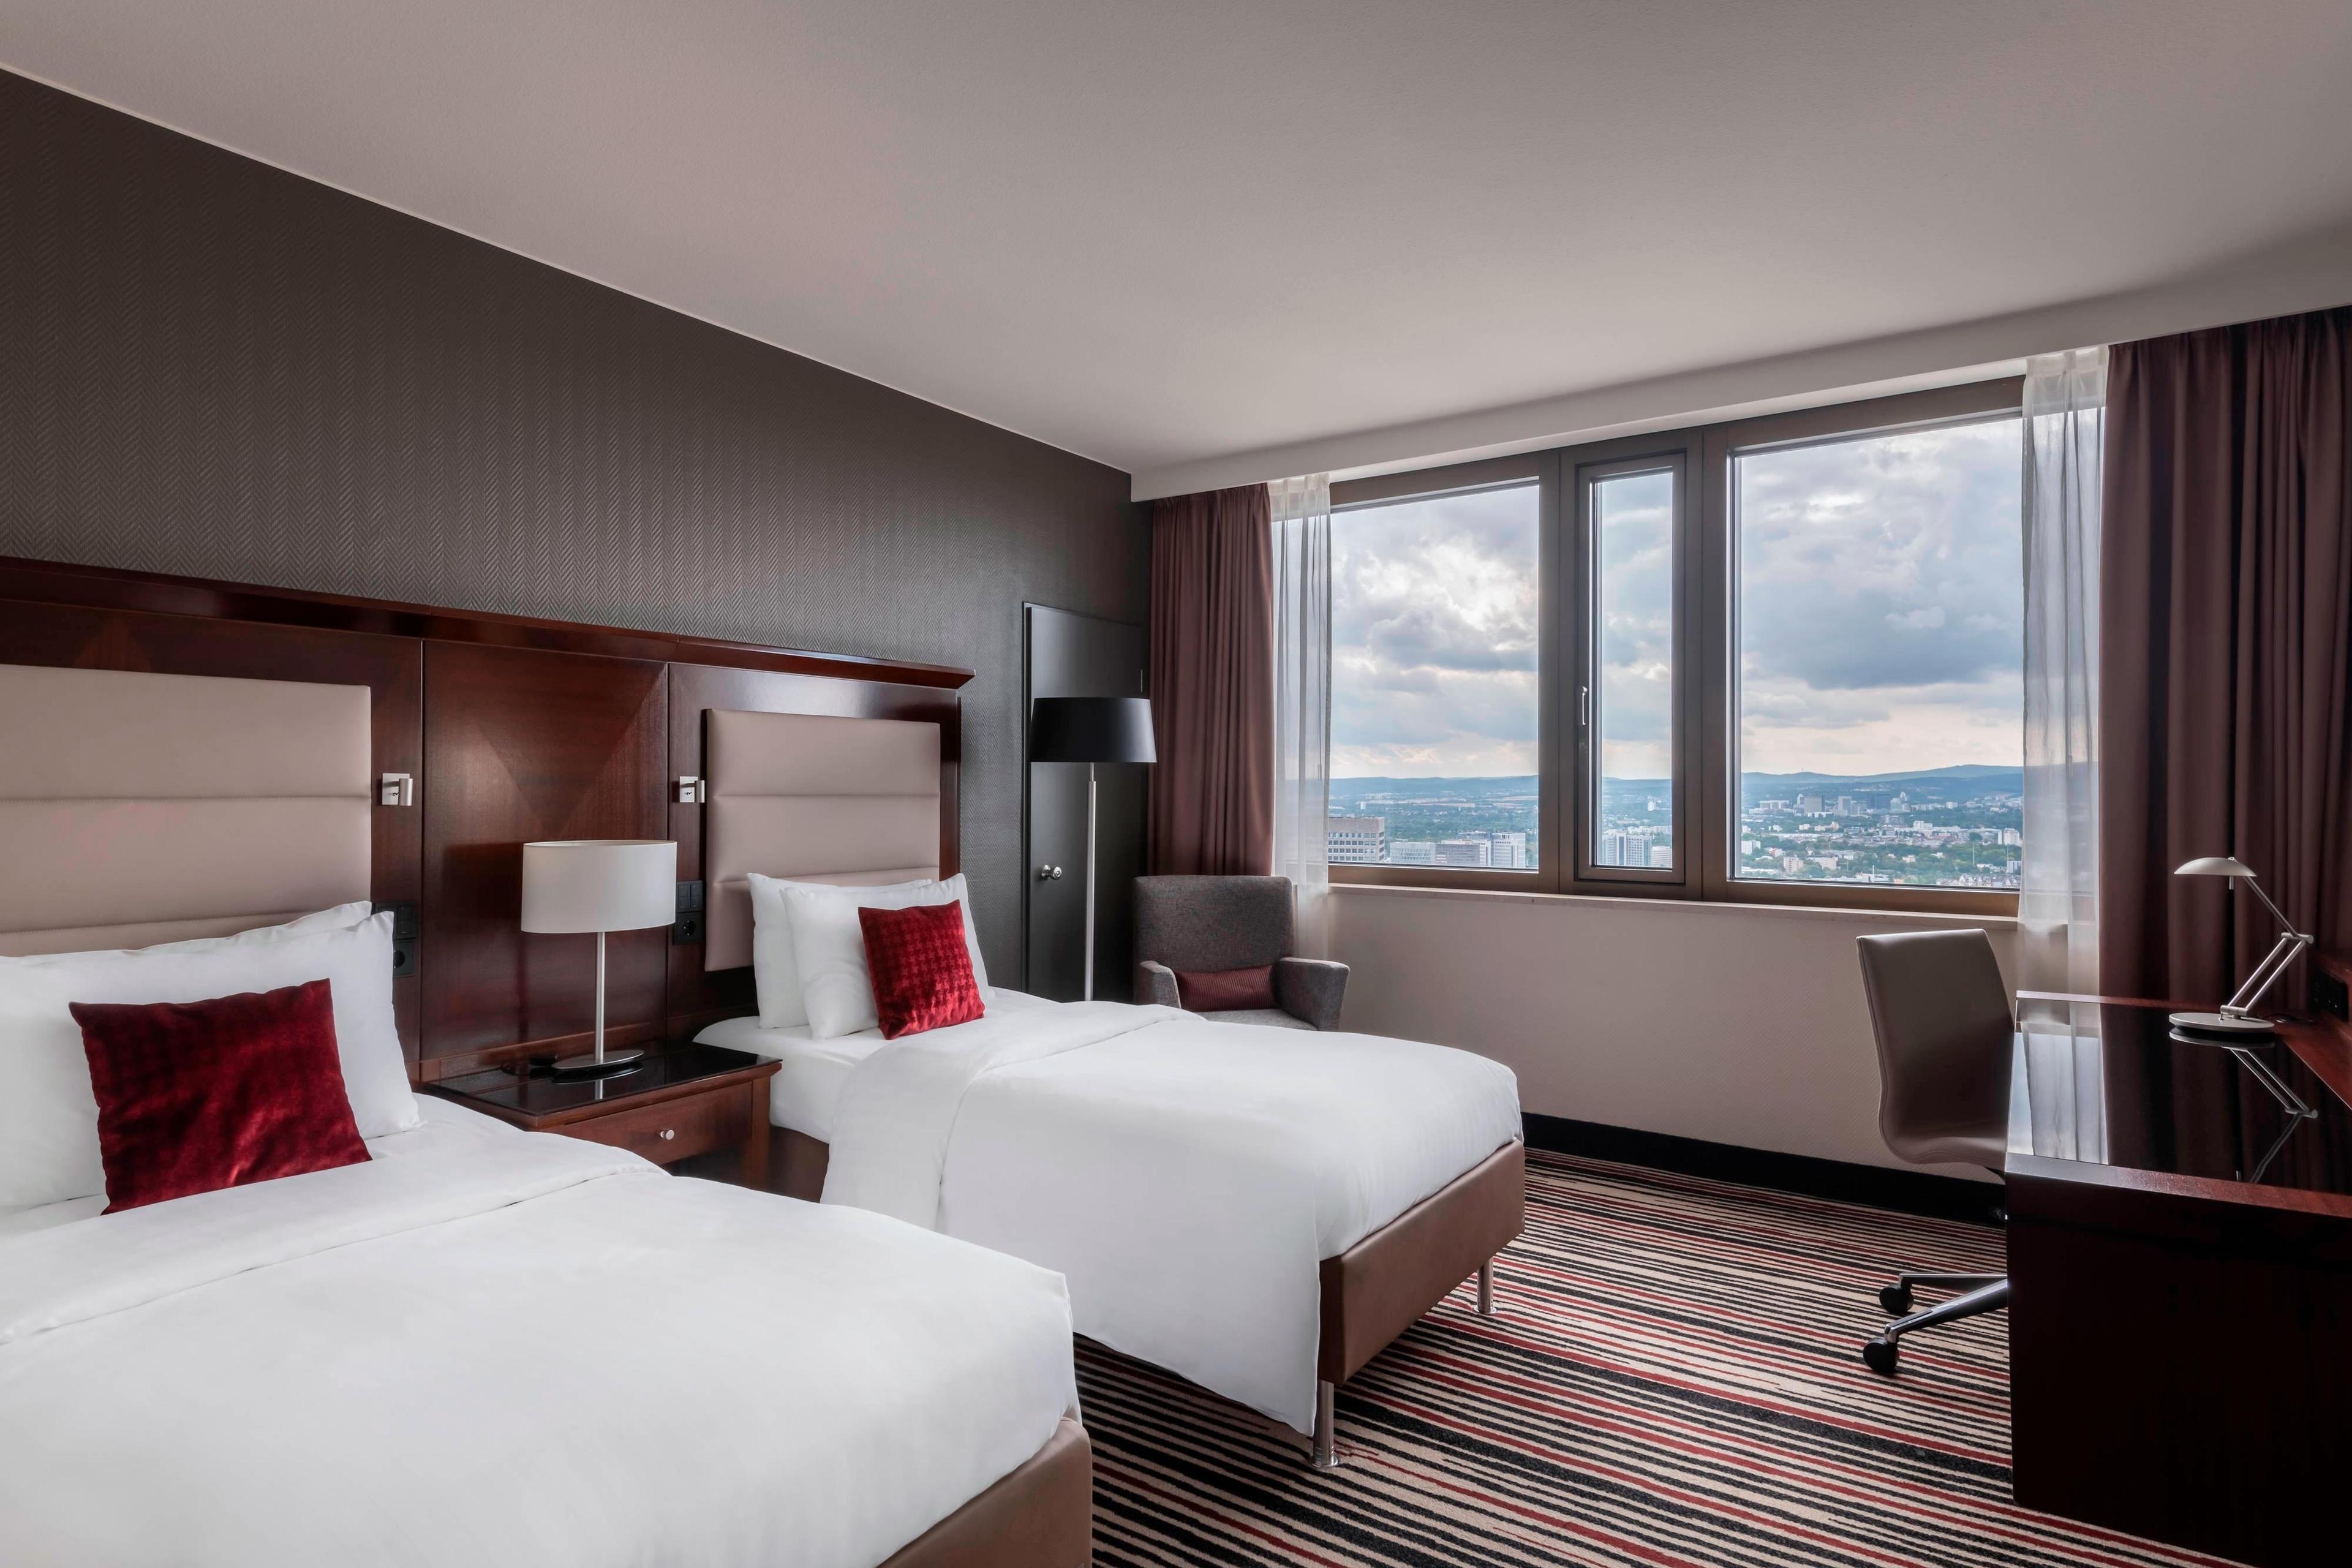 Our twin/twin guest room is a perfect central accommodation at a top business hotel in Frankfurt.